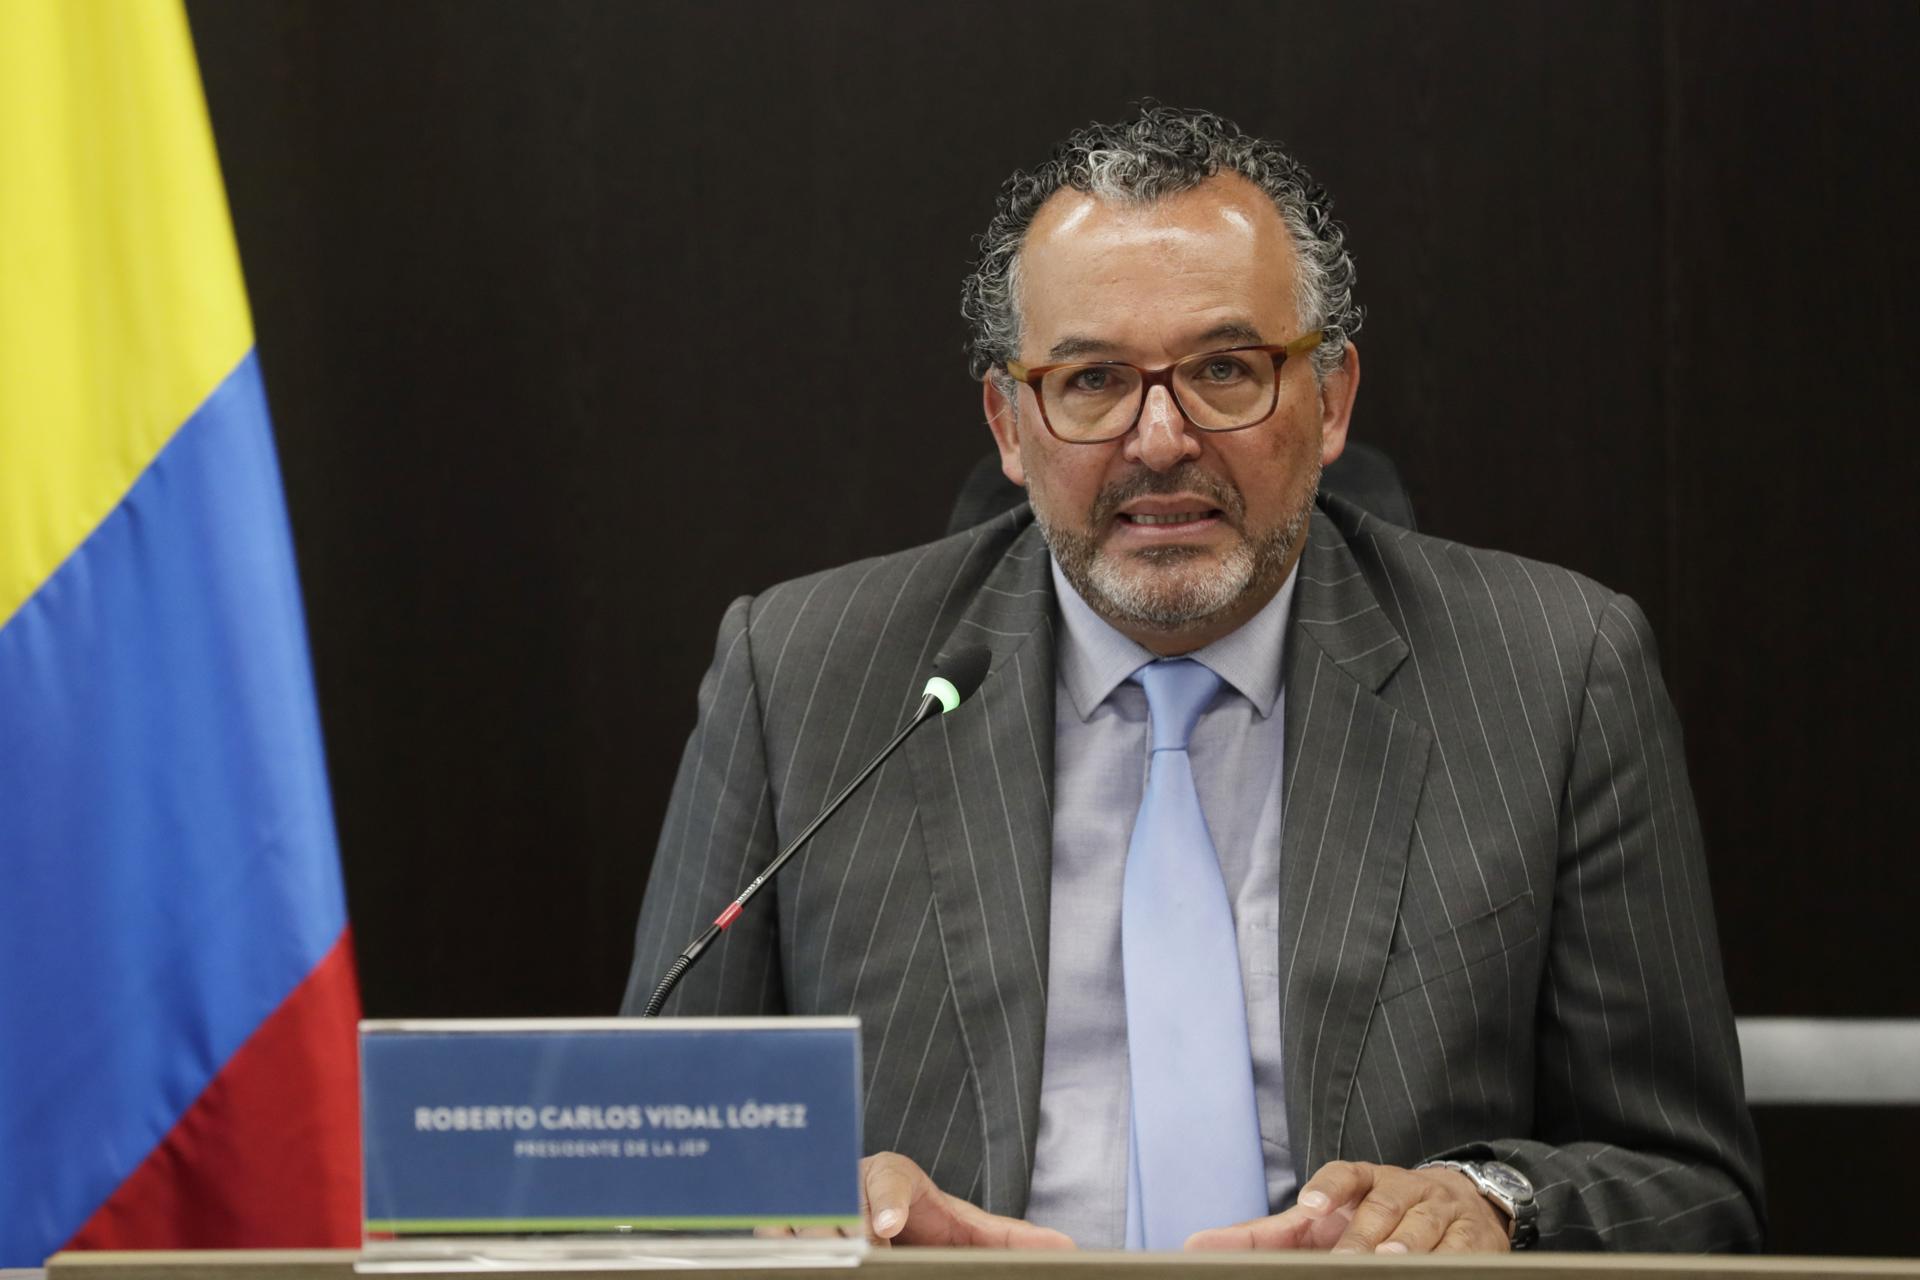 The chief justice of Colombia's Special Jurisdiction for Peace (JEP), Roberto Carlos Vidal (left), speaks during a press conference on 7 July 2023 in Bogota, Colombia, after war-crimes charges were announced against 10 ex-FARC mid-level commanders. EFE/Carlos Ortega
